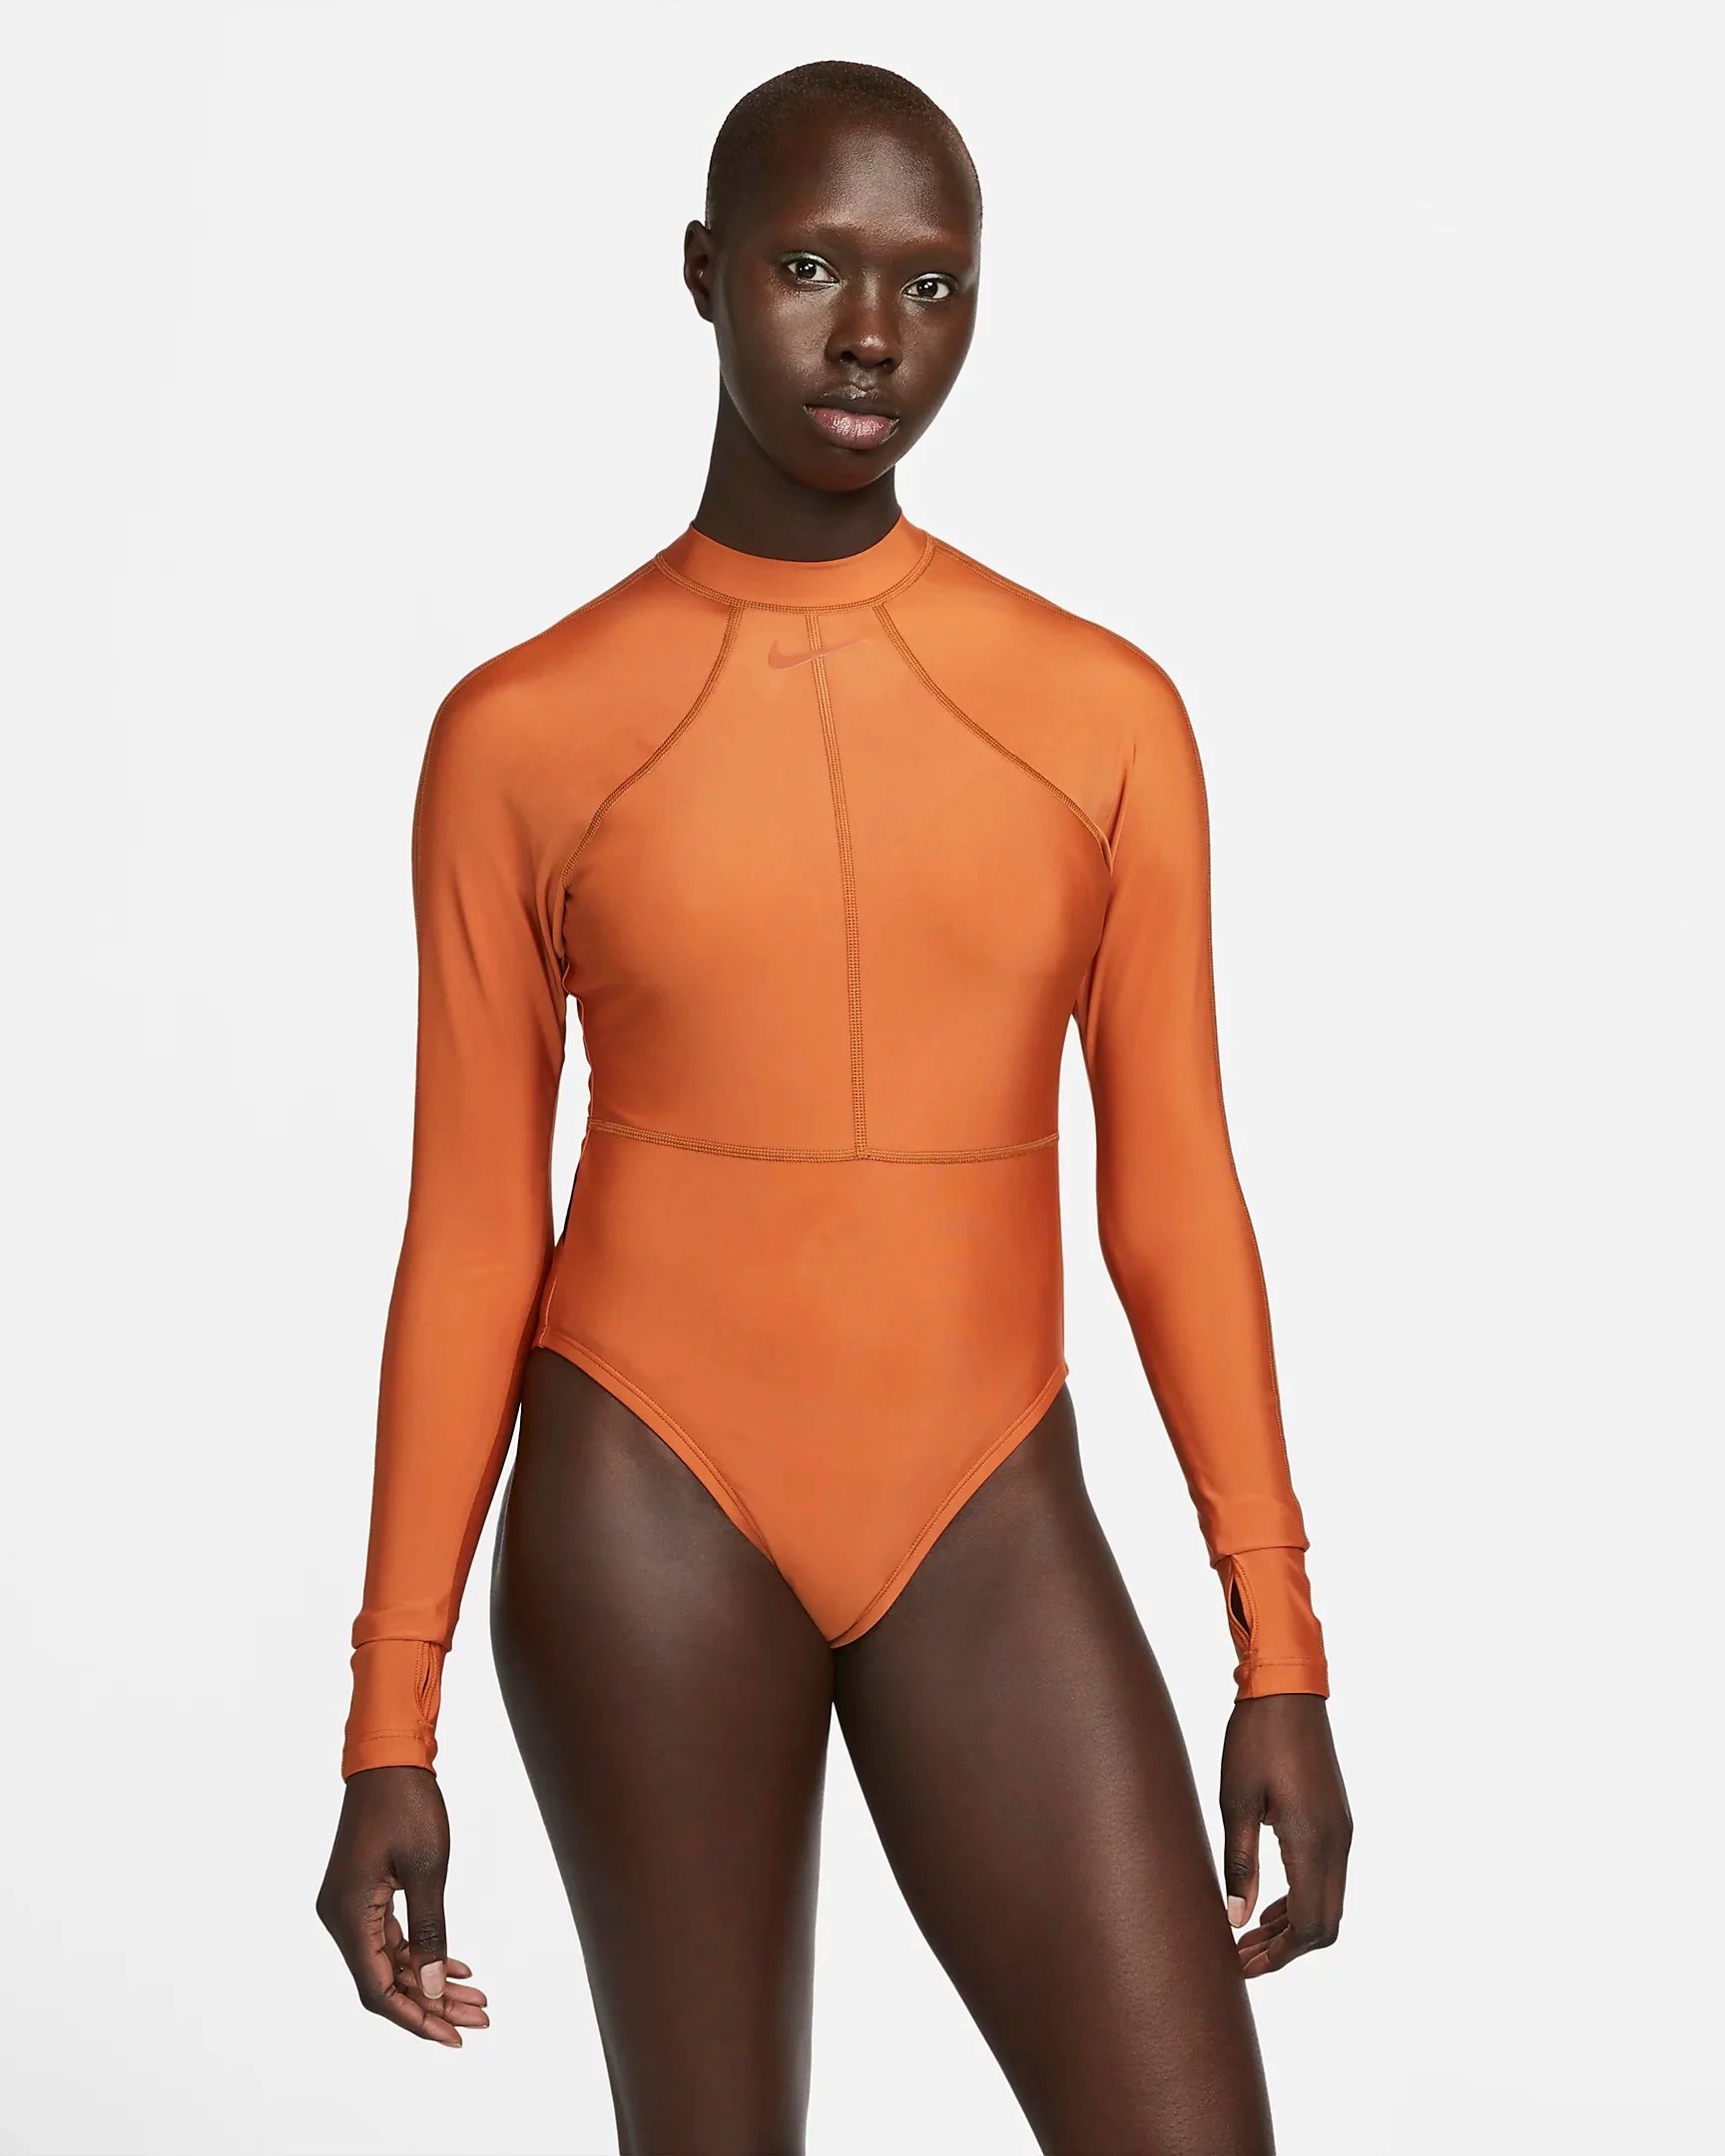 Nike Fusion Long-Sleeve One-Piece Swimsuit, Best Swimsuits 2023